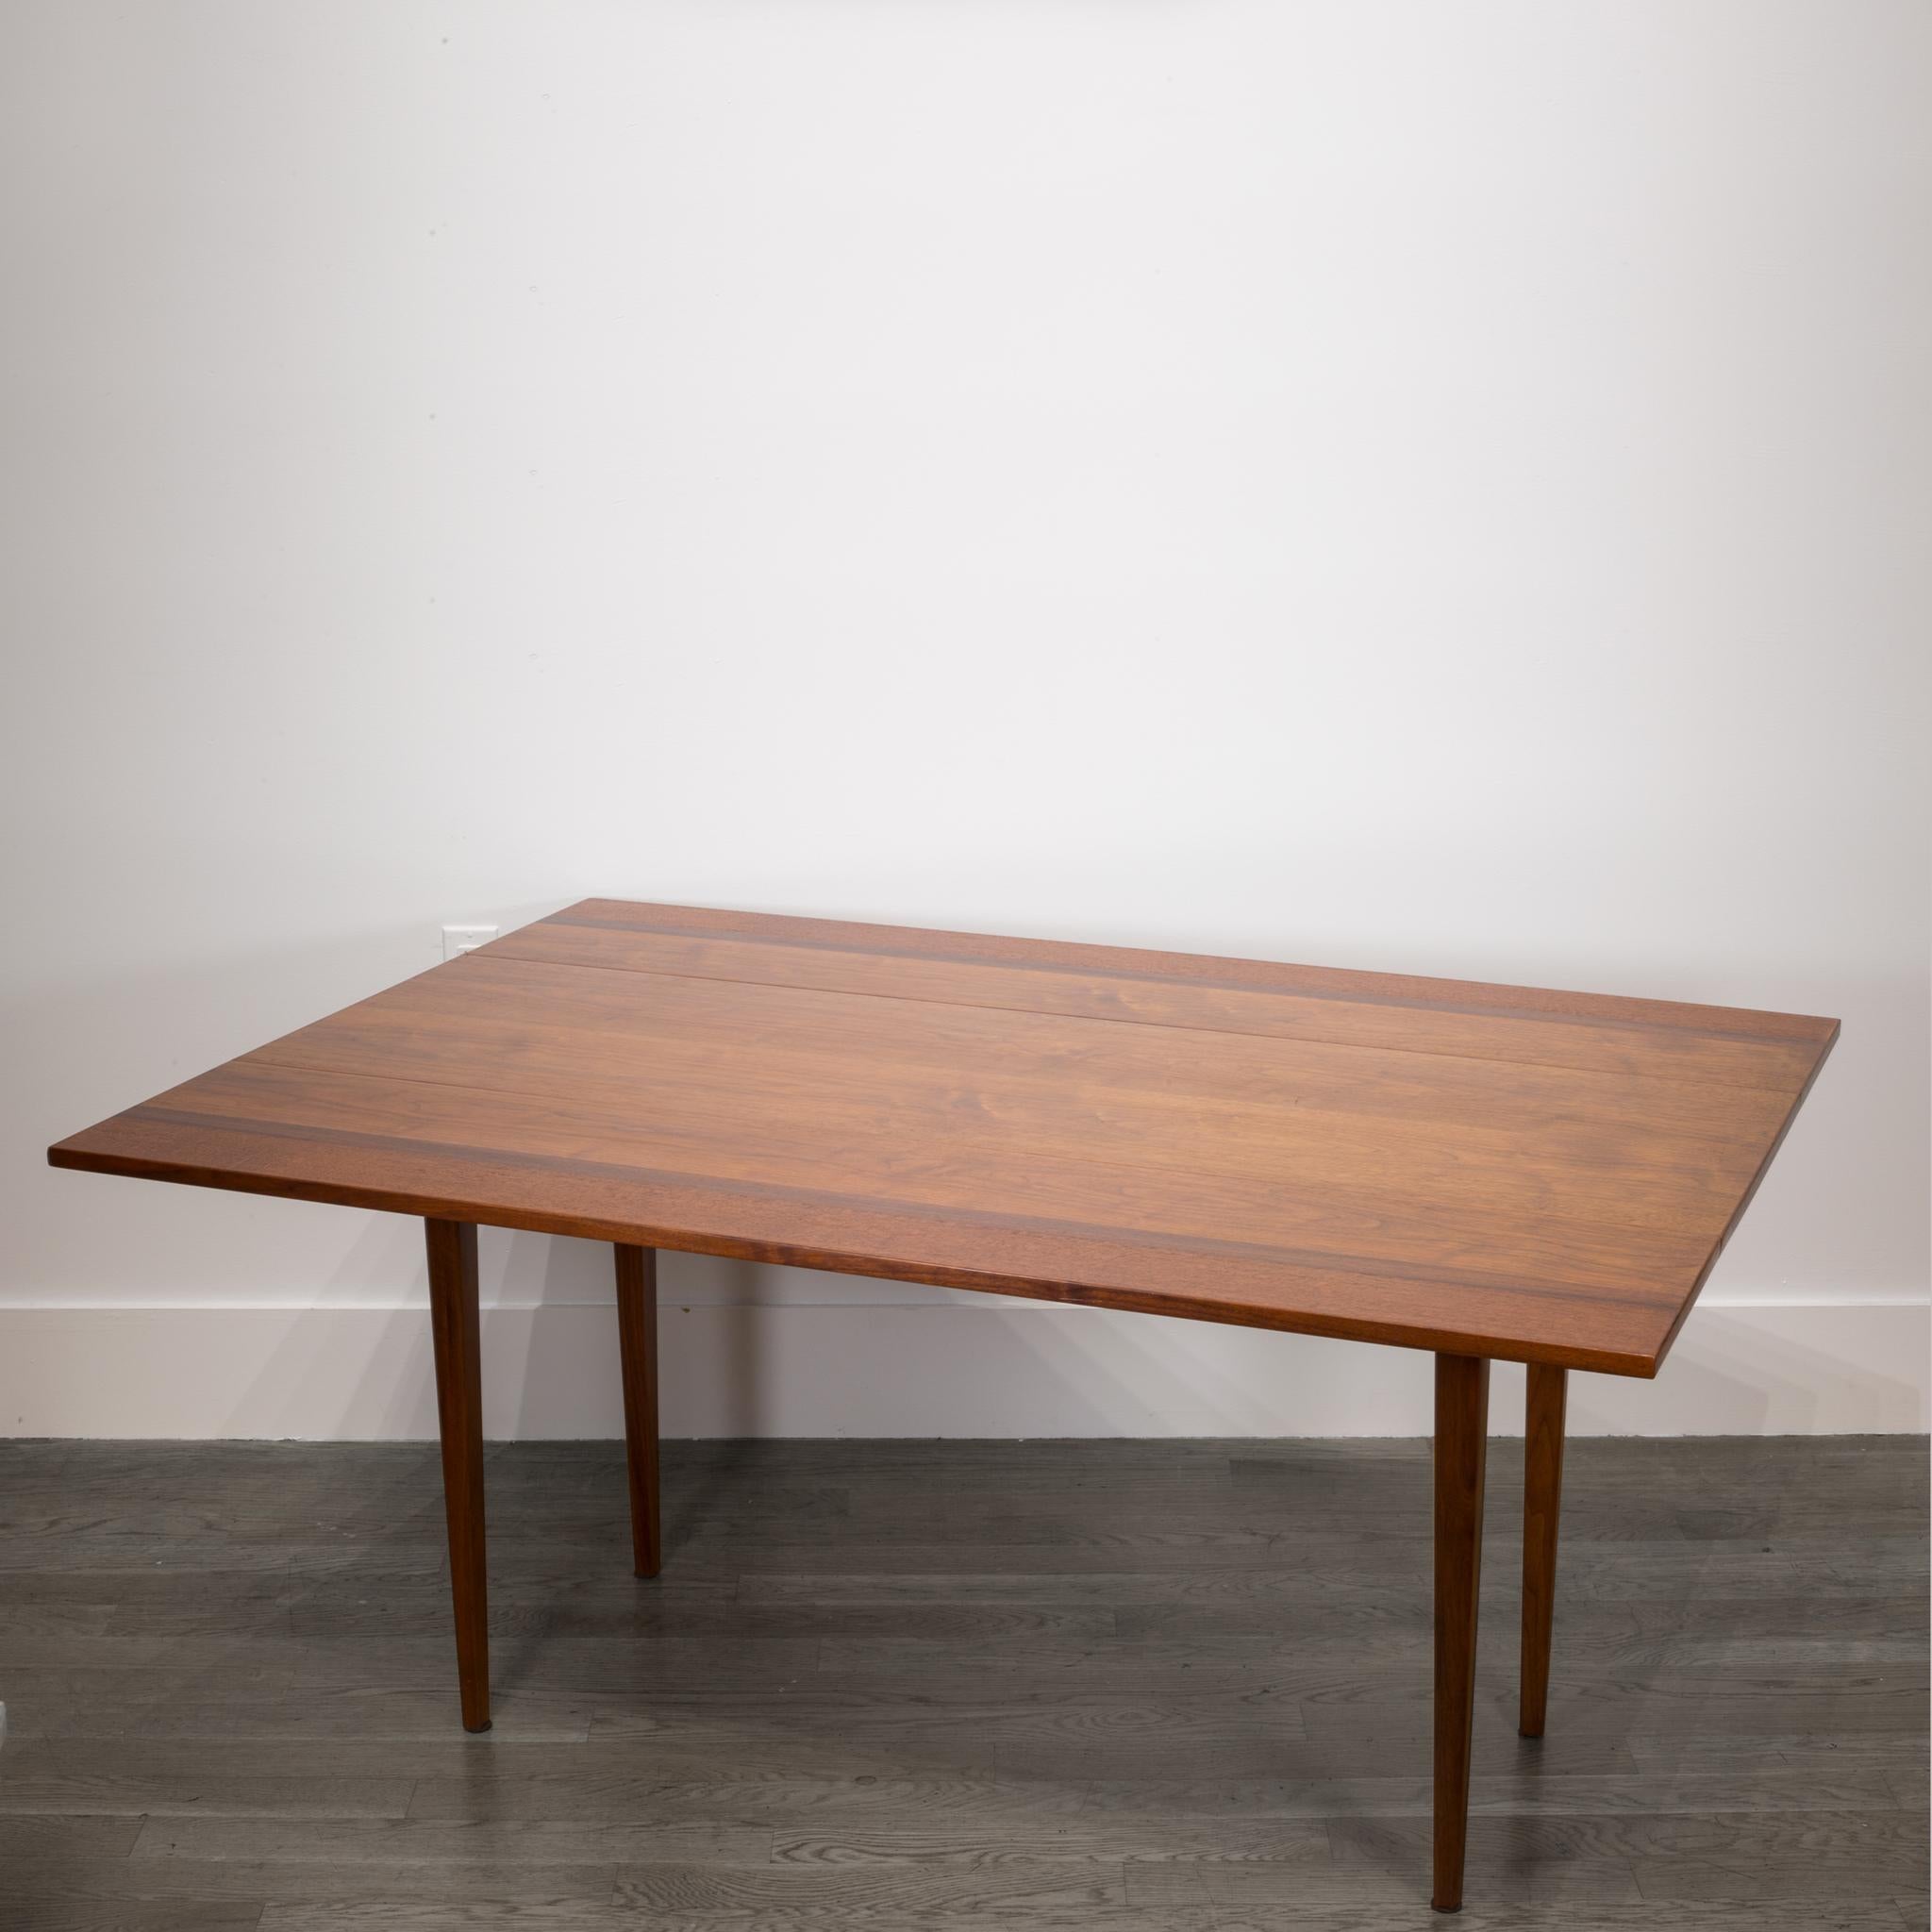 20th Century Hibriten Walnut, Mahogany, Rosewood Drop-Leaf Dining Table or Console, c. 1960s